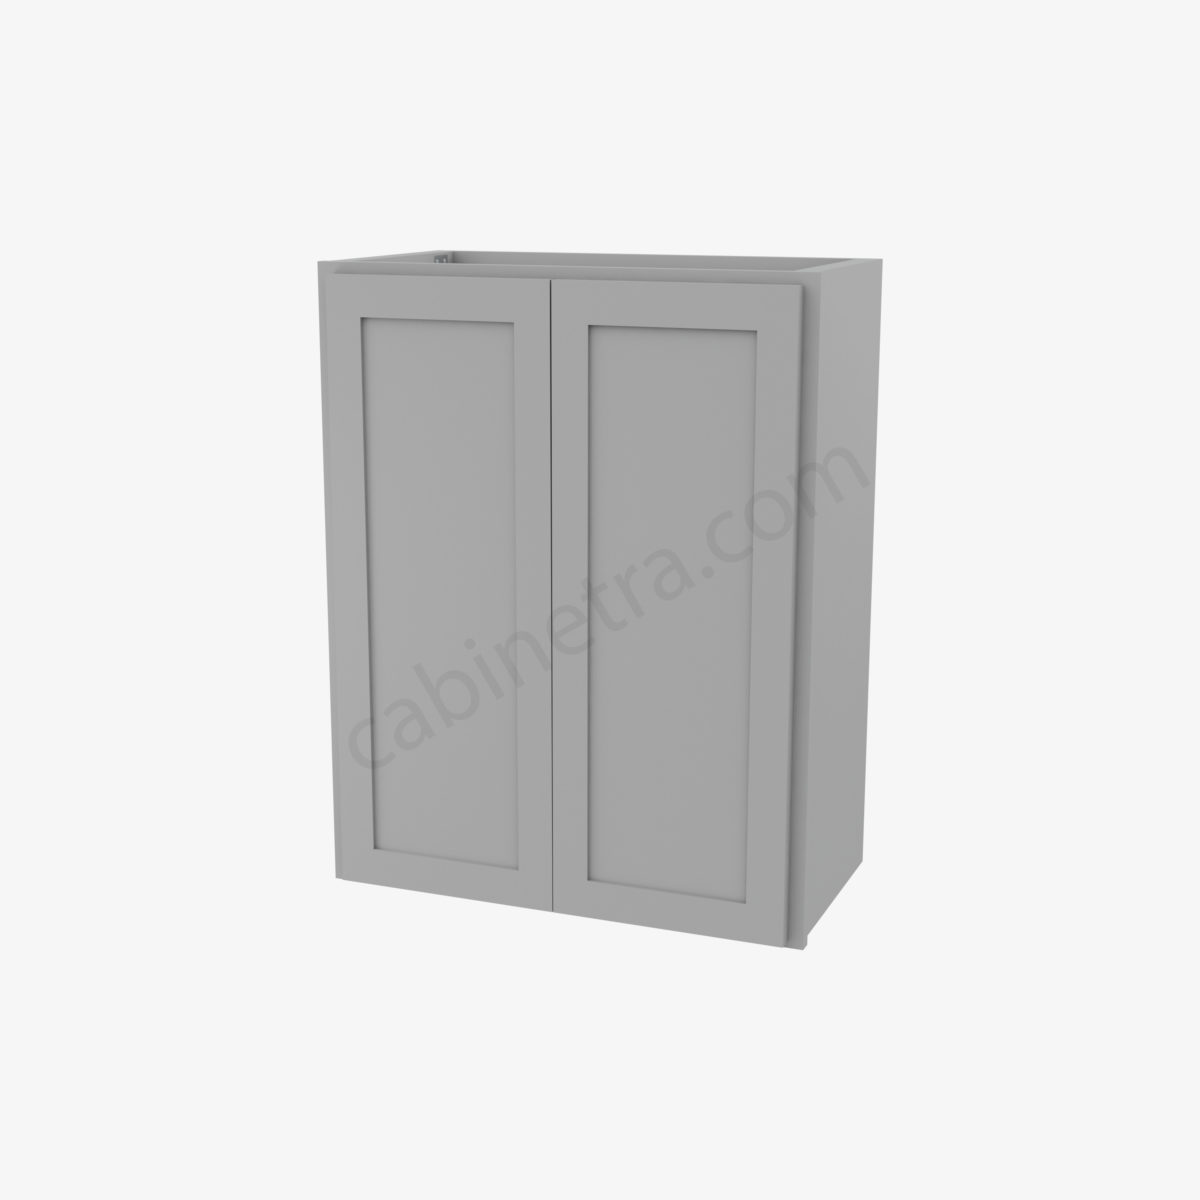 AB W2430B 0 Forevermark Lait Gray Shaker Cabinetra scaled